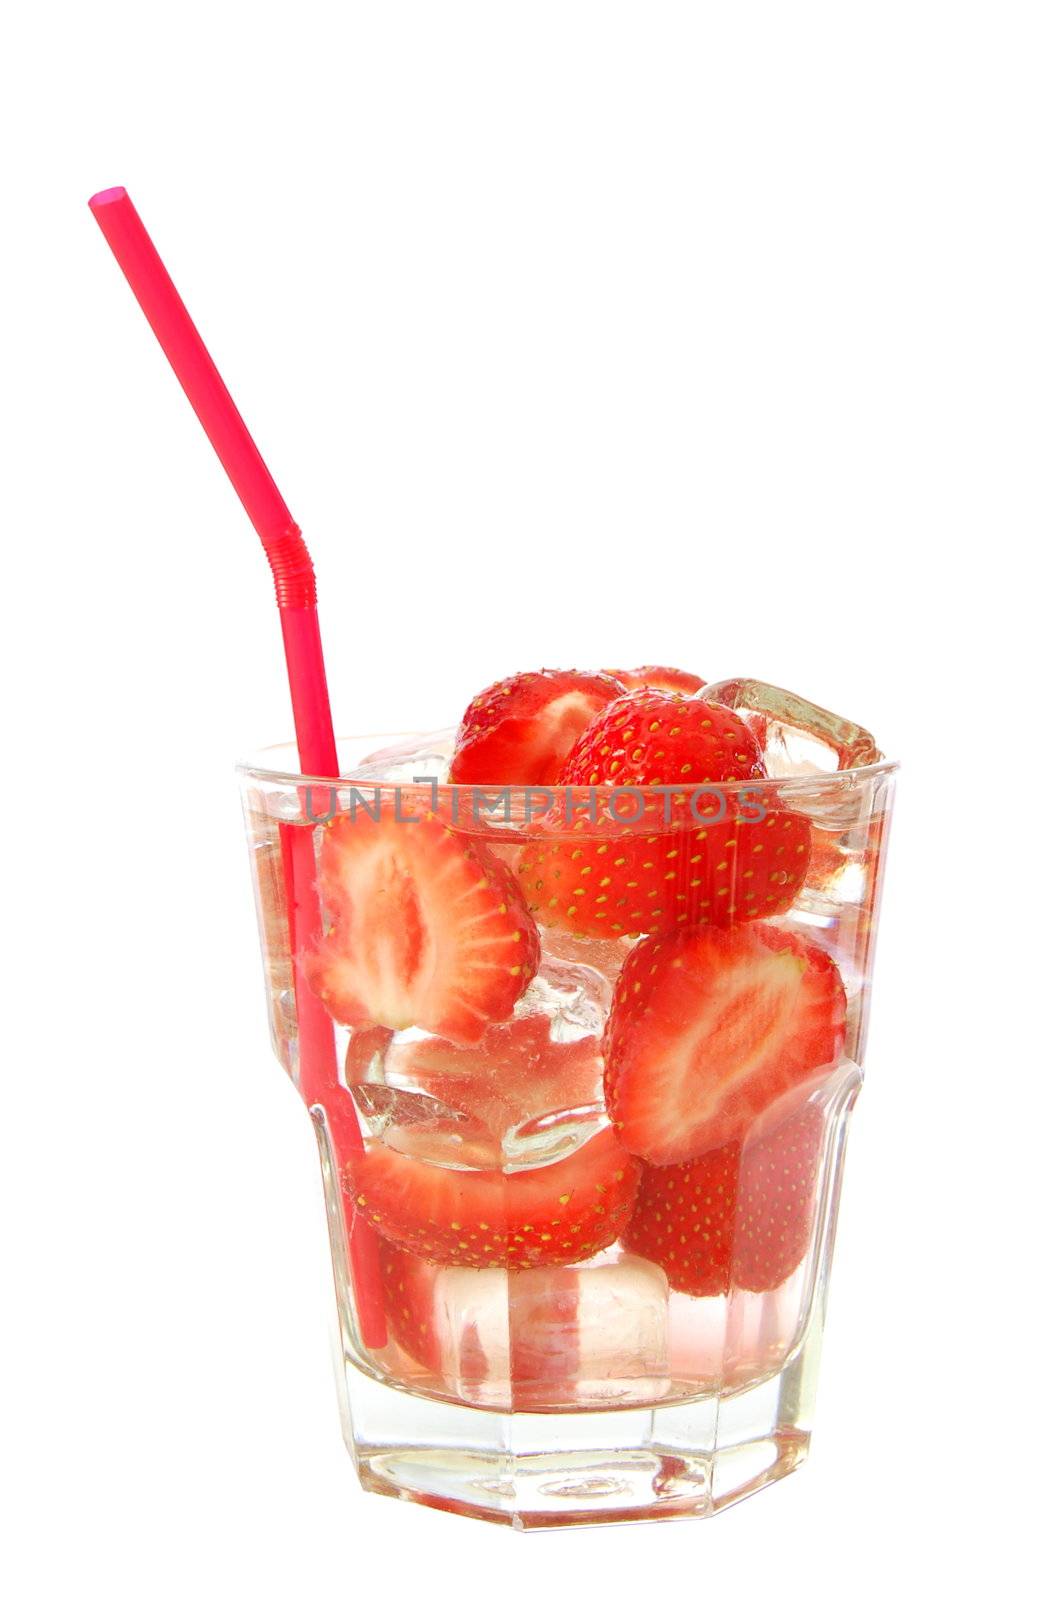 healthy drink with sliced strawberry fruit isolated on white